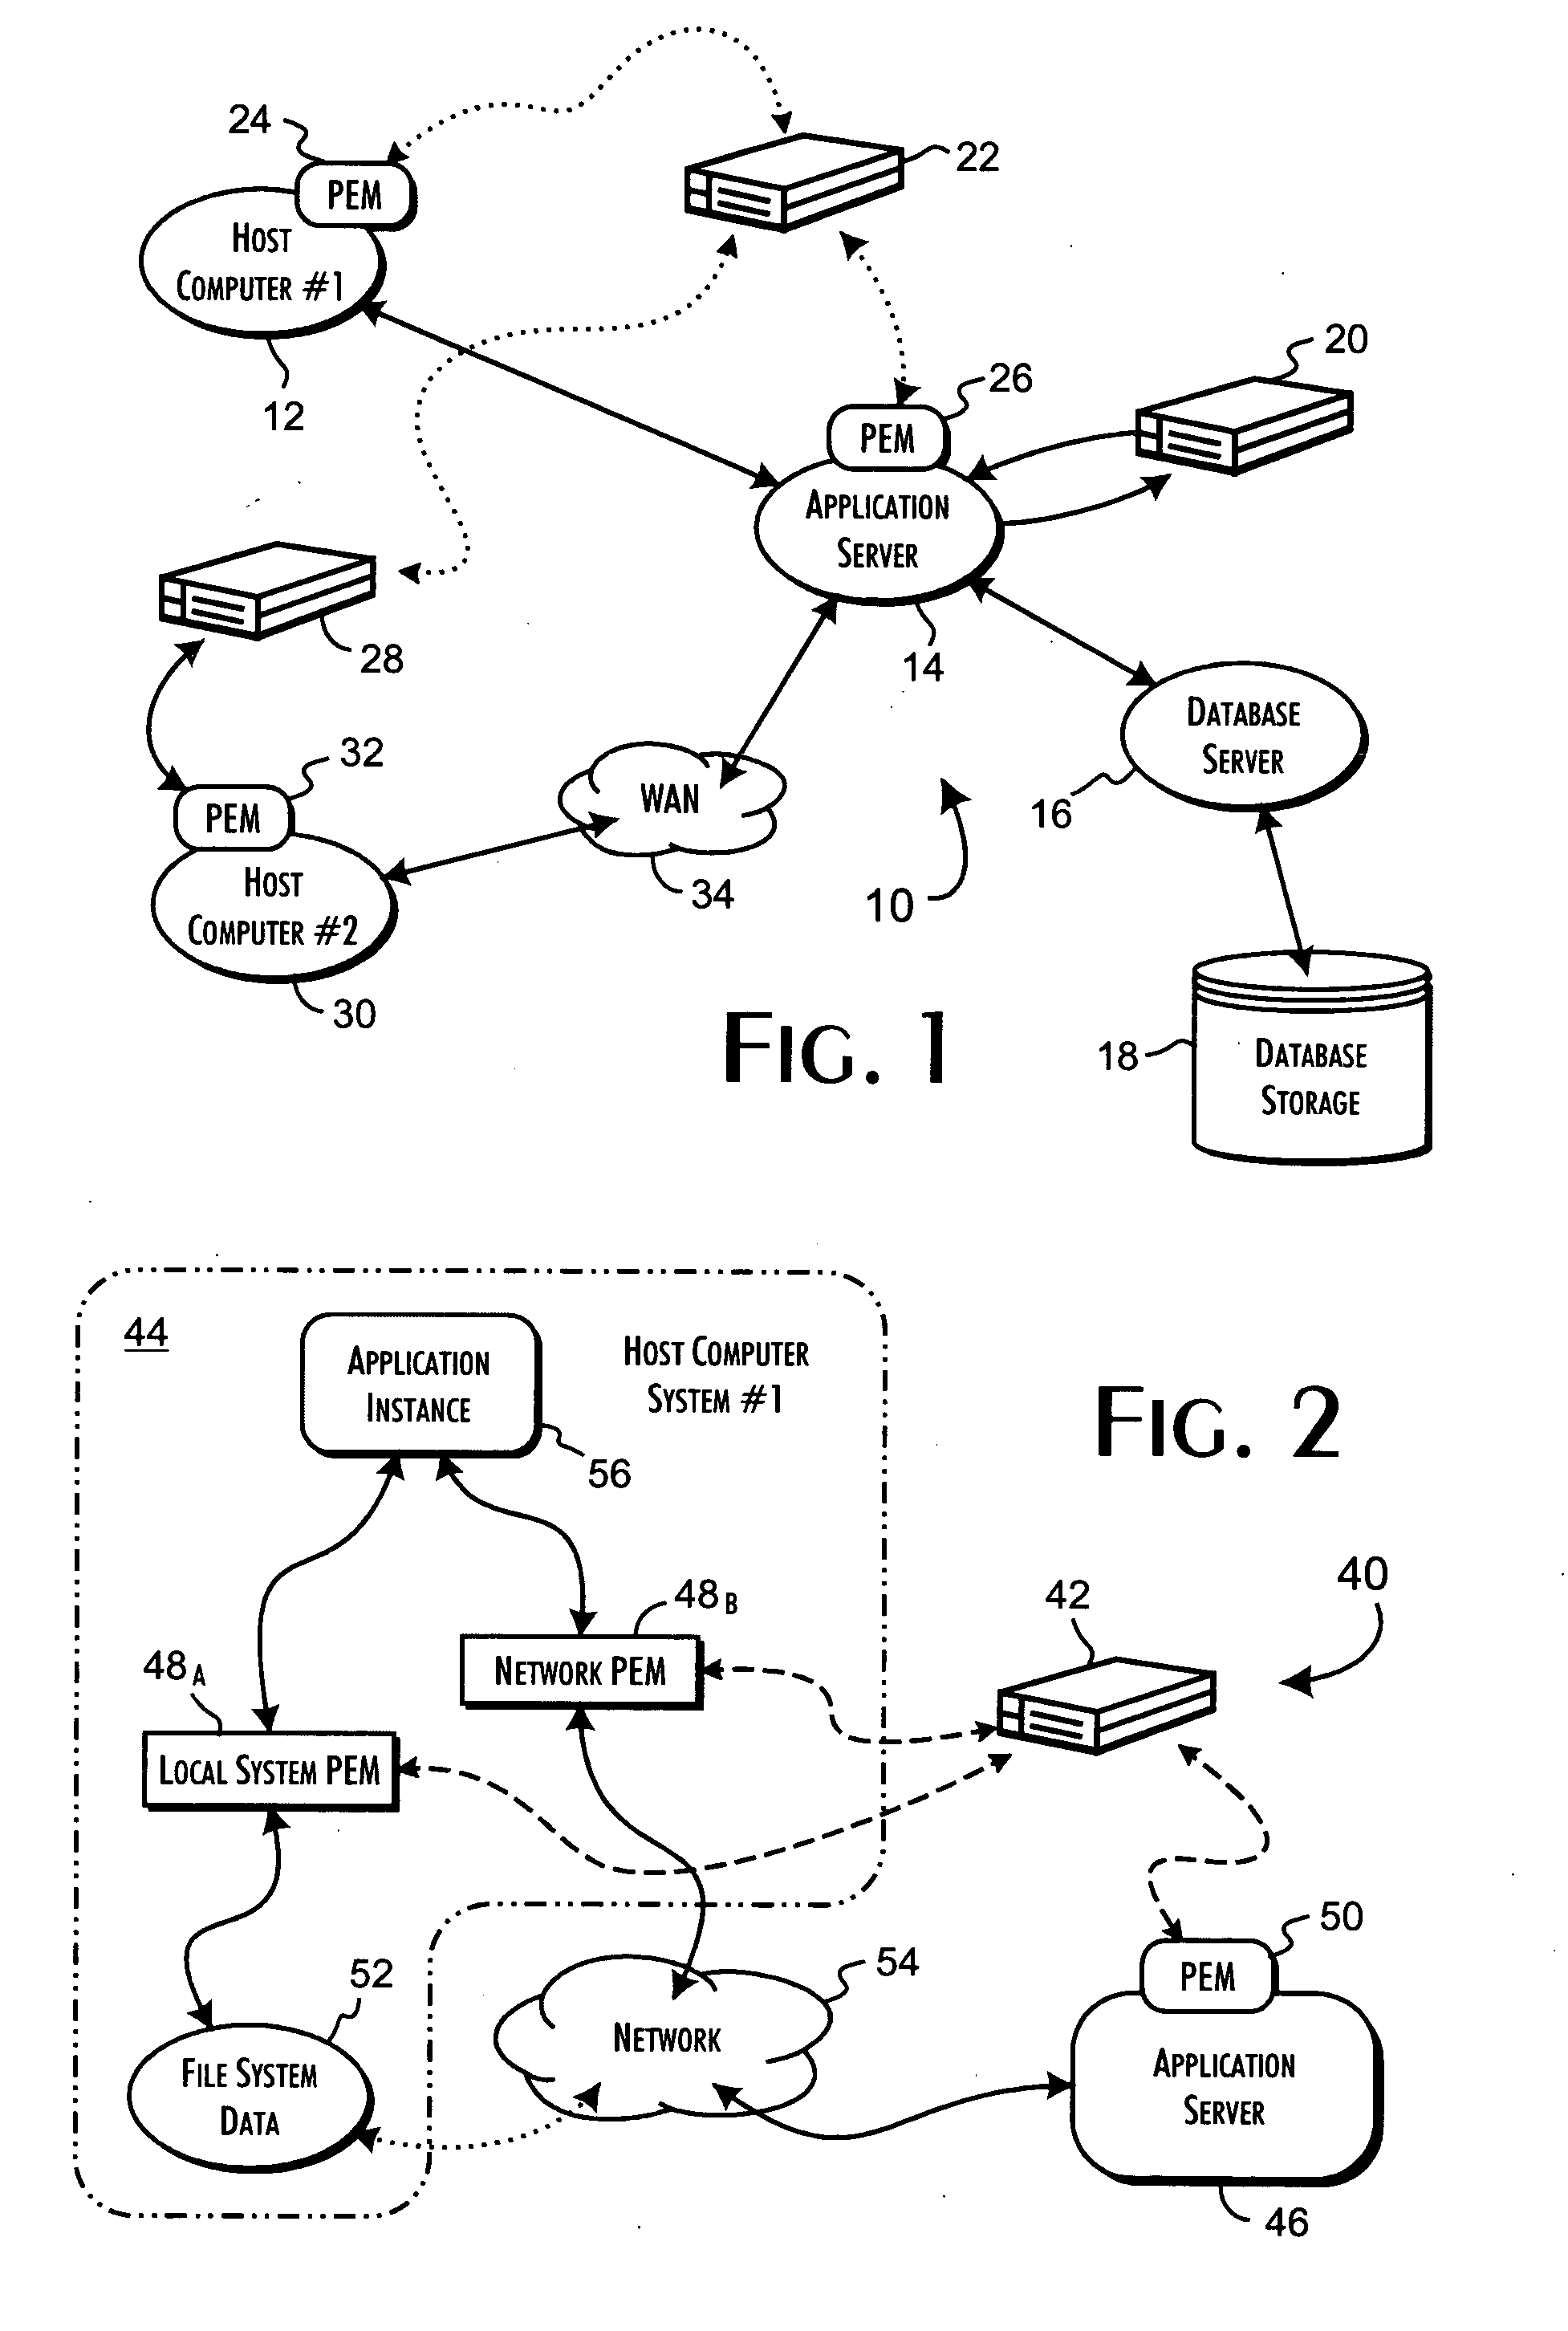 Secure interprocess communications binding system and methods